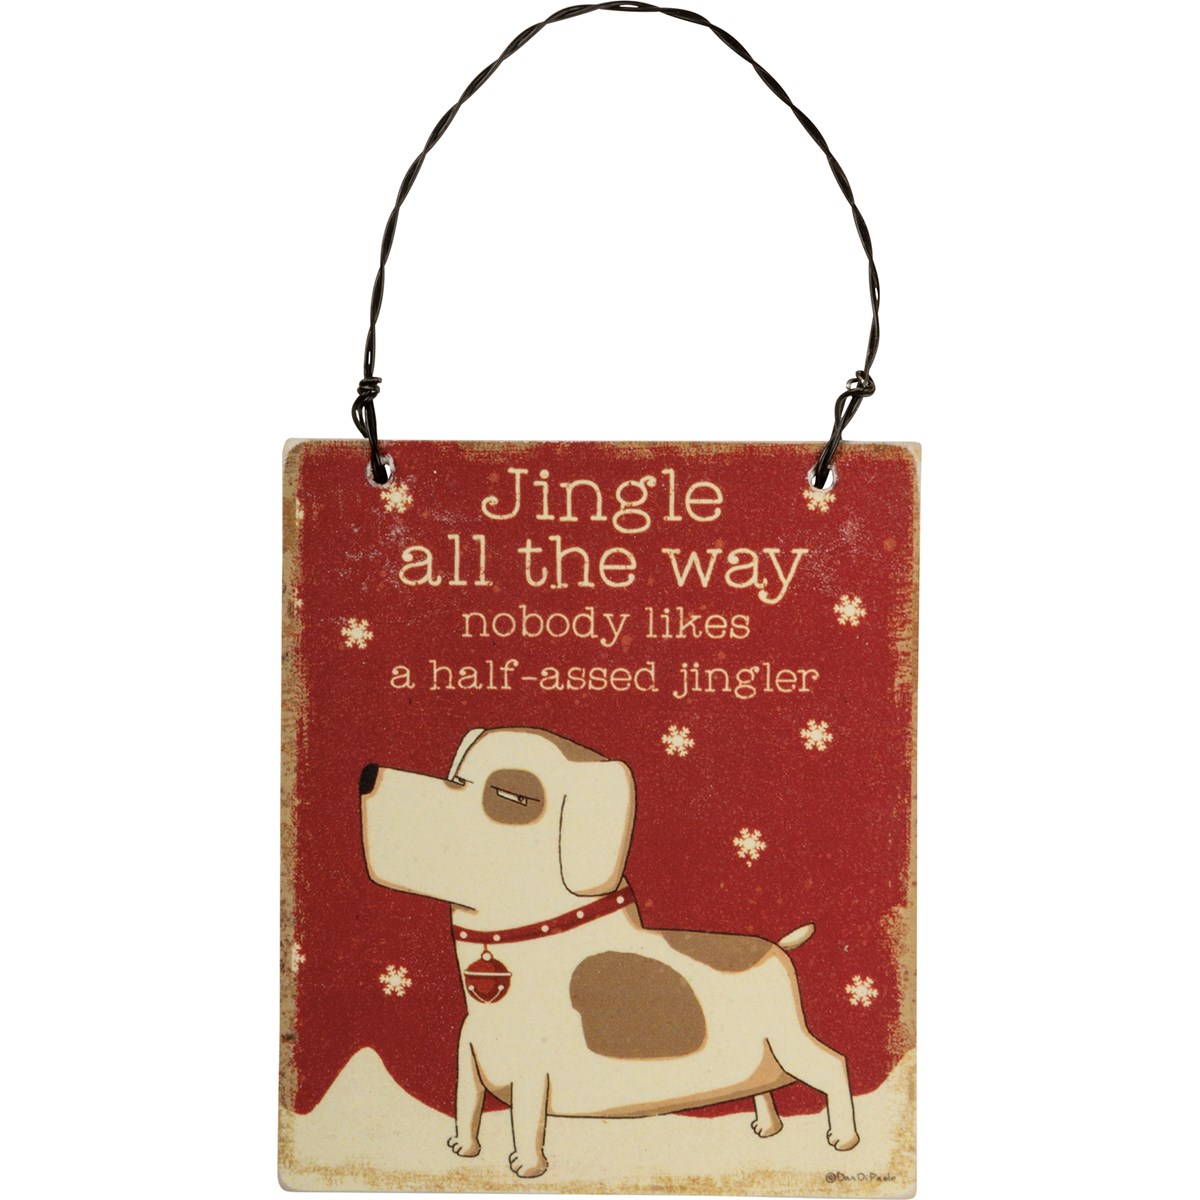 Sassy Dogs Ornament Set - Wood, Paper, Wire